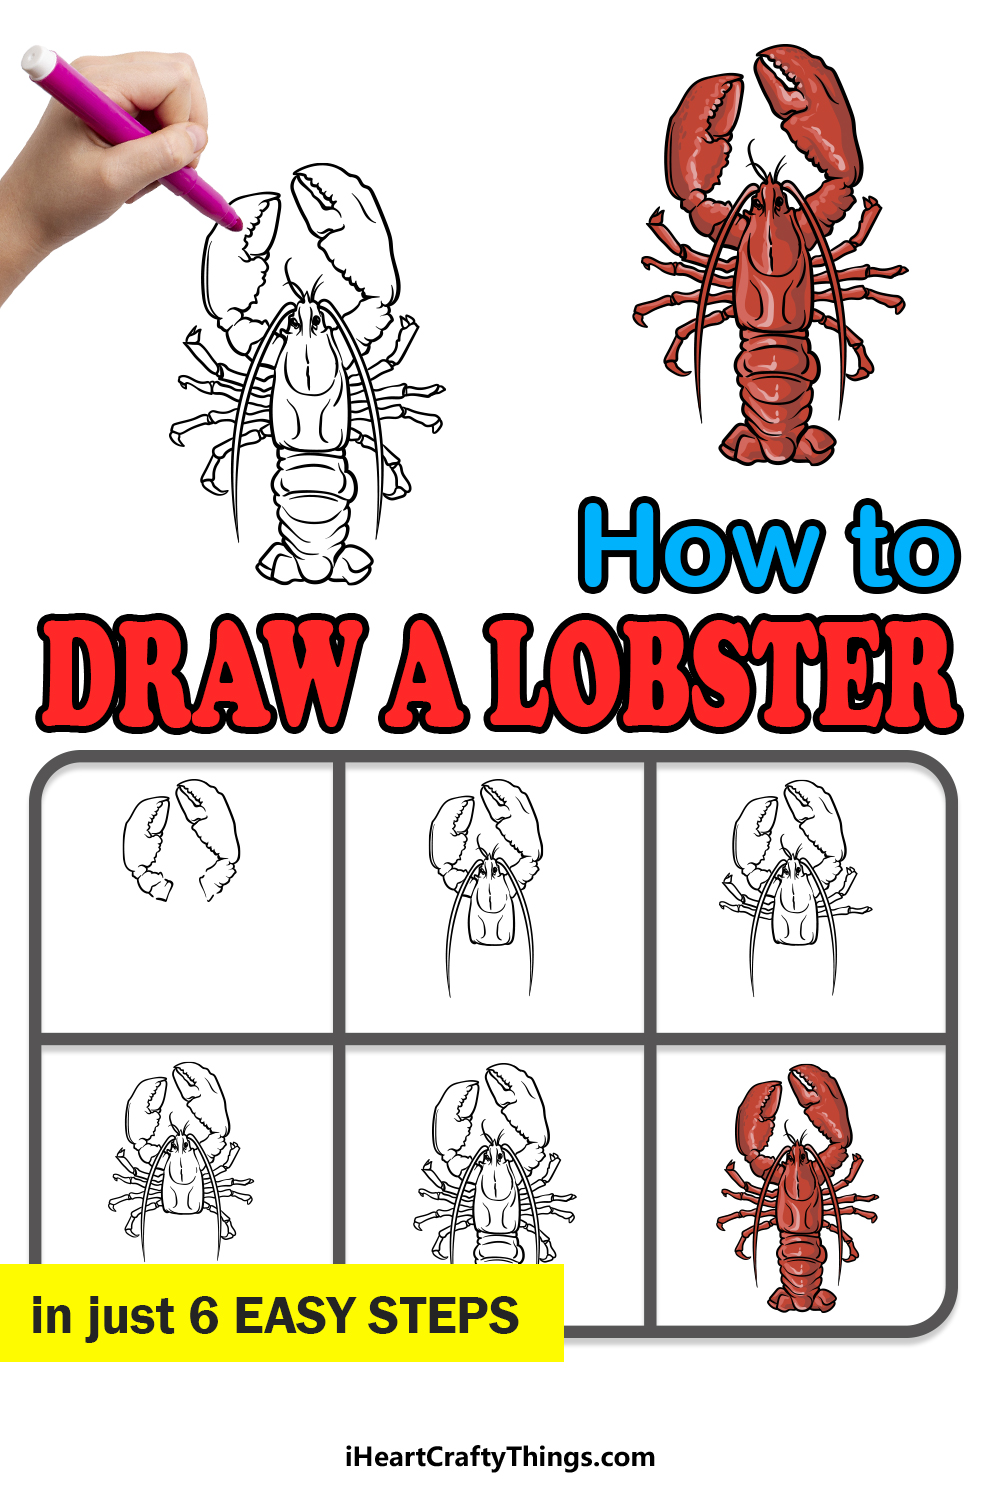 how to draw a lobster in 6 easy steps